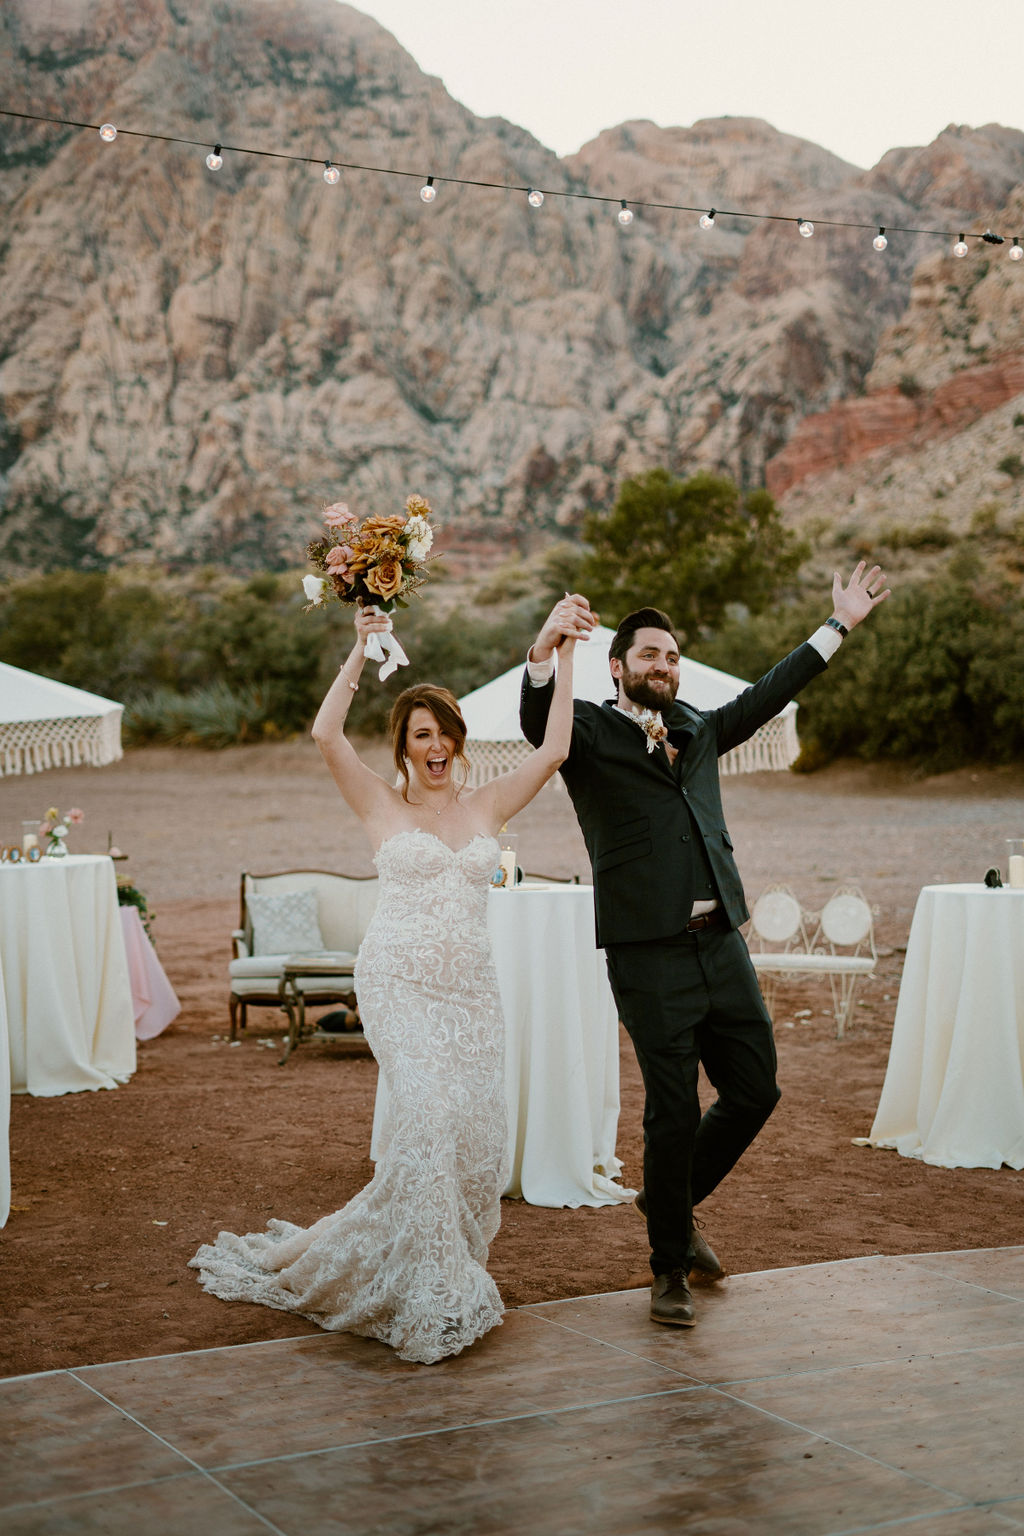 A bride and groom walk hand in hand at an outdoor wedding reception with tables, decorative umbrellas, and string lights, with a dramatic mountain backdrop at Red Rock Canyon